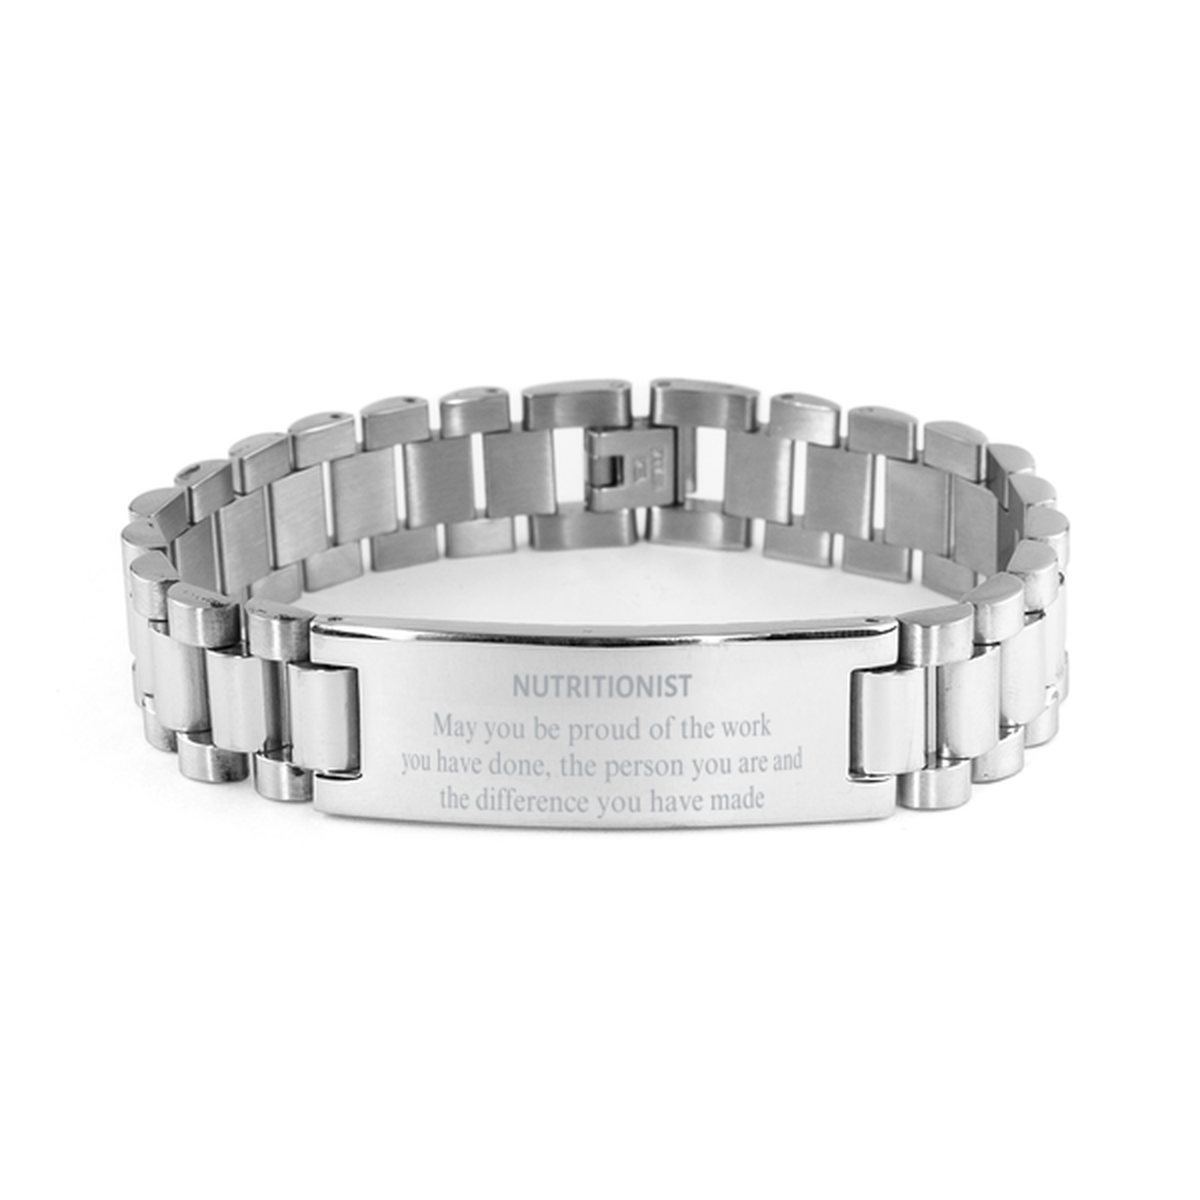 Nutritionist May you be proud of the work you have done, Retirement Nutritionist Ladder Stainless Steel Bracelet for Colleague Appreciation Gifts Amazing for Nutritionist